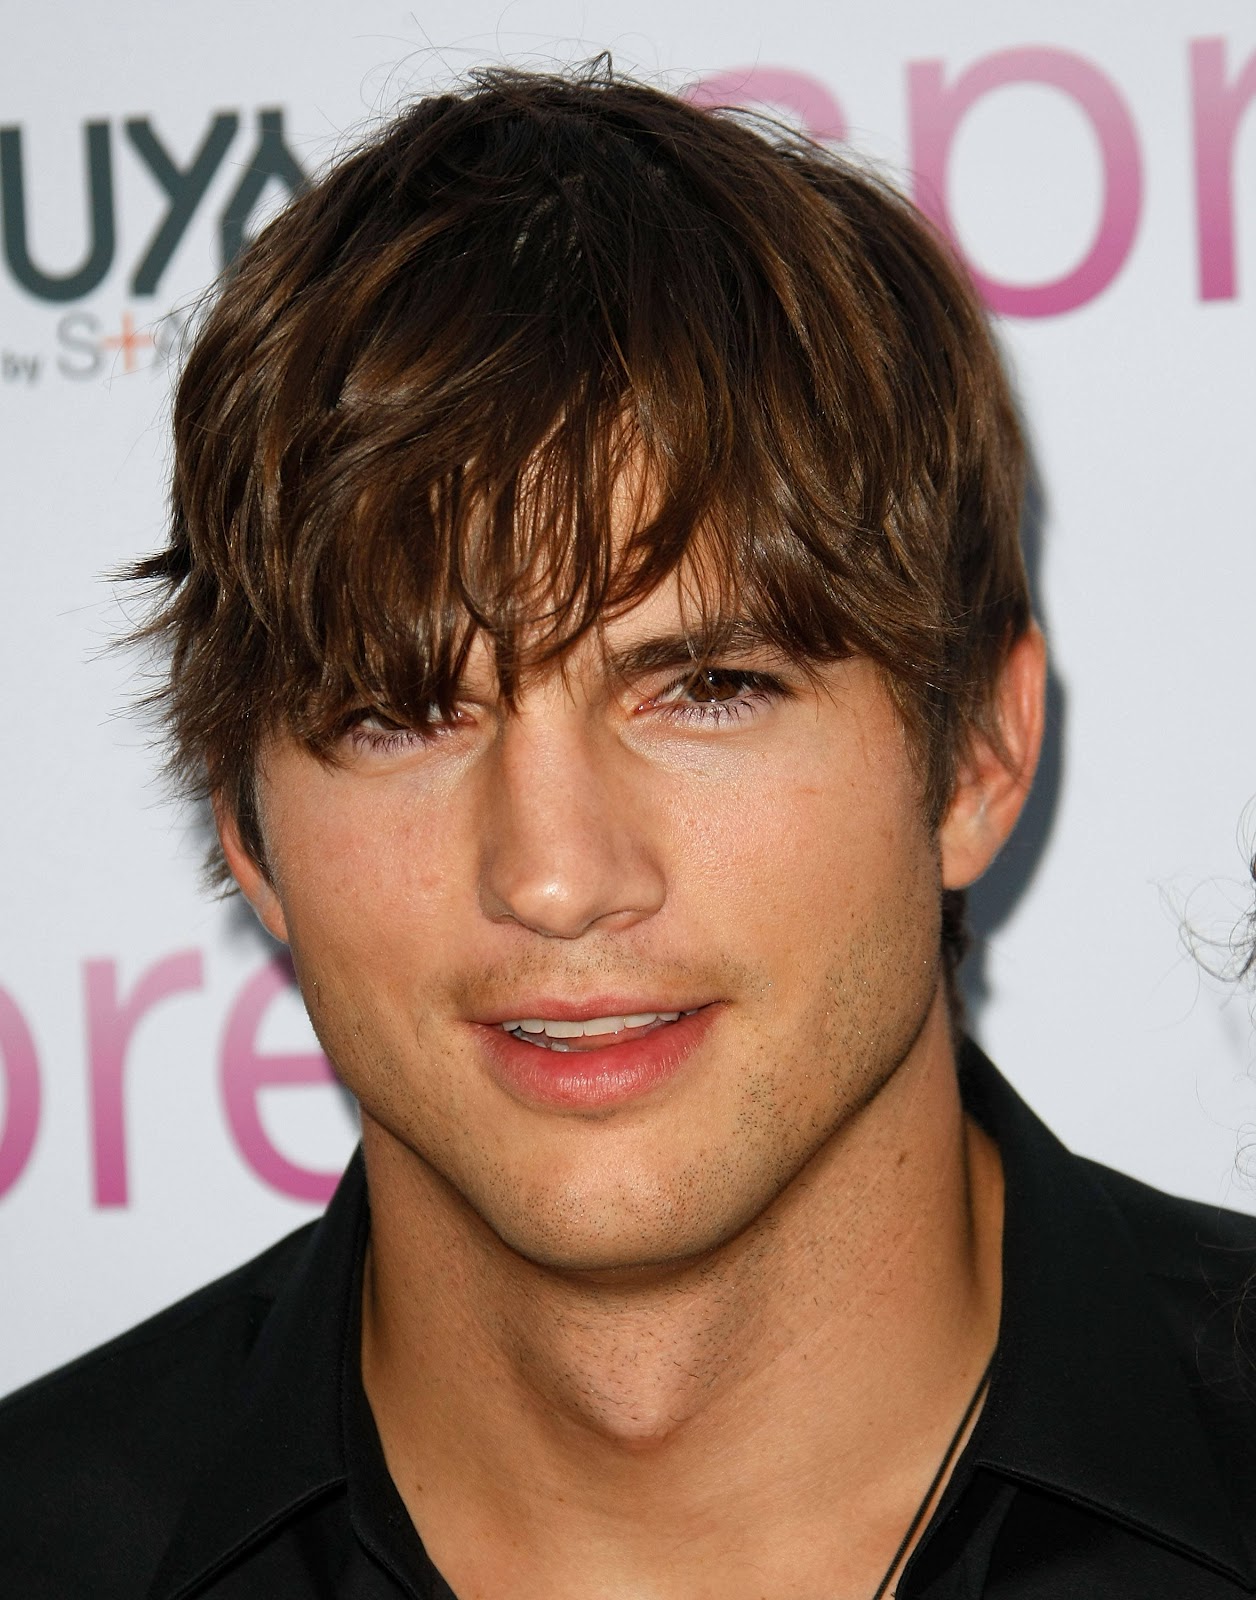 Men's Hairstyles For 2011: Casual Short Hairstyles For Men title=